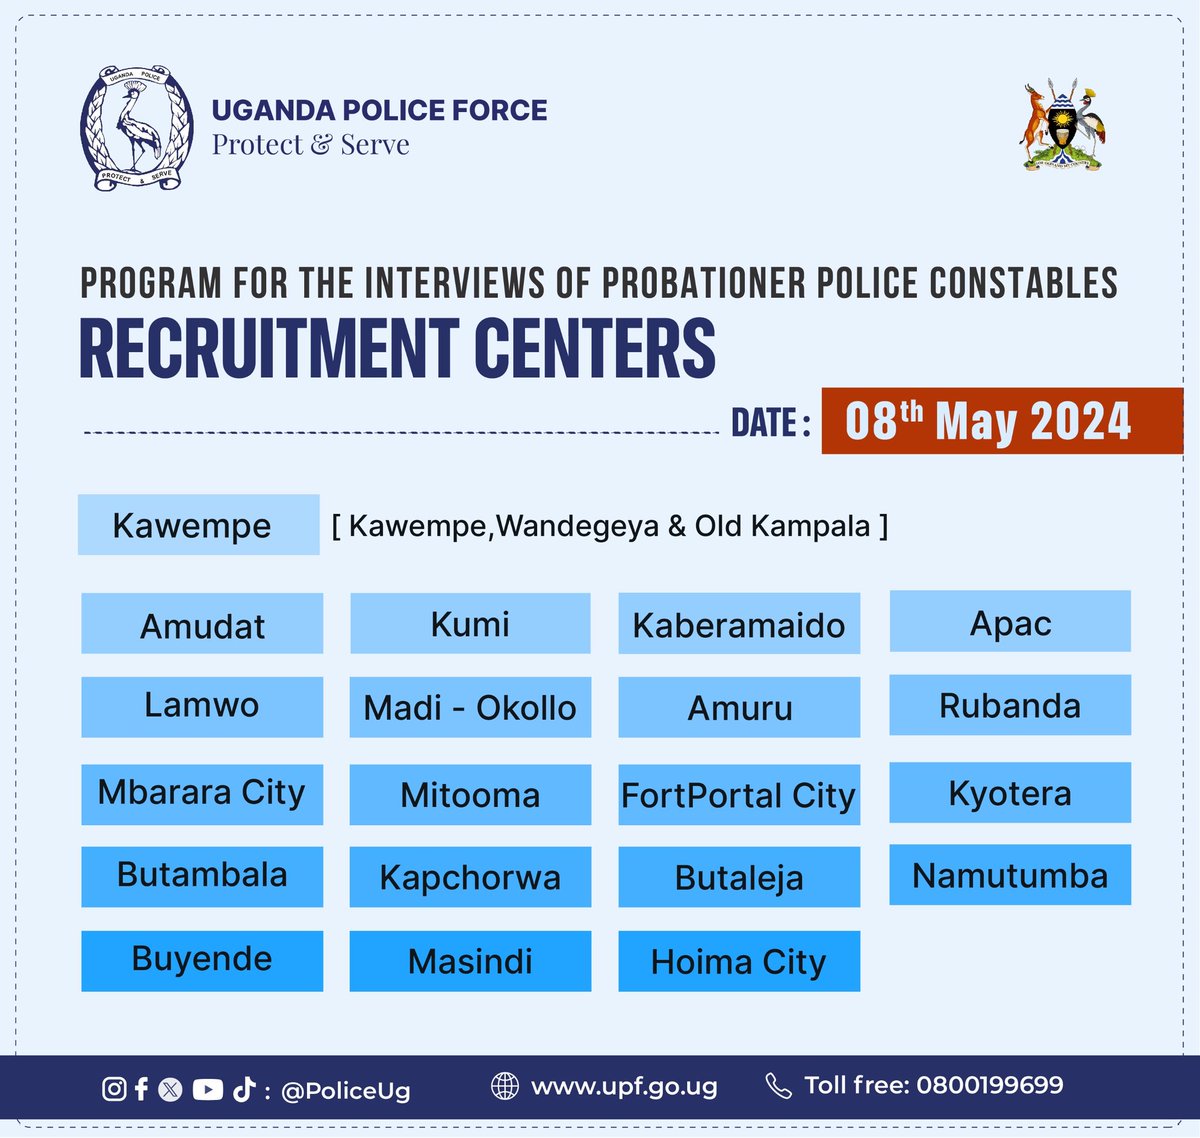 Recruitment program for tomorrow 08th.May.2024